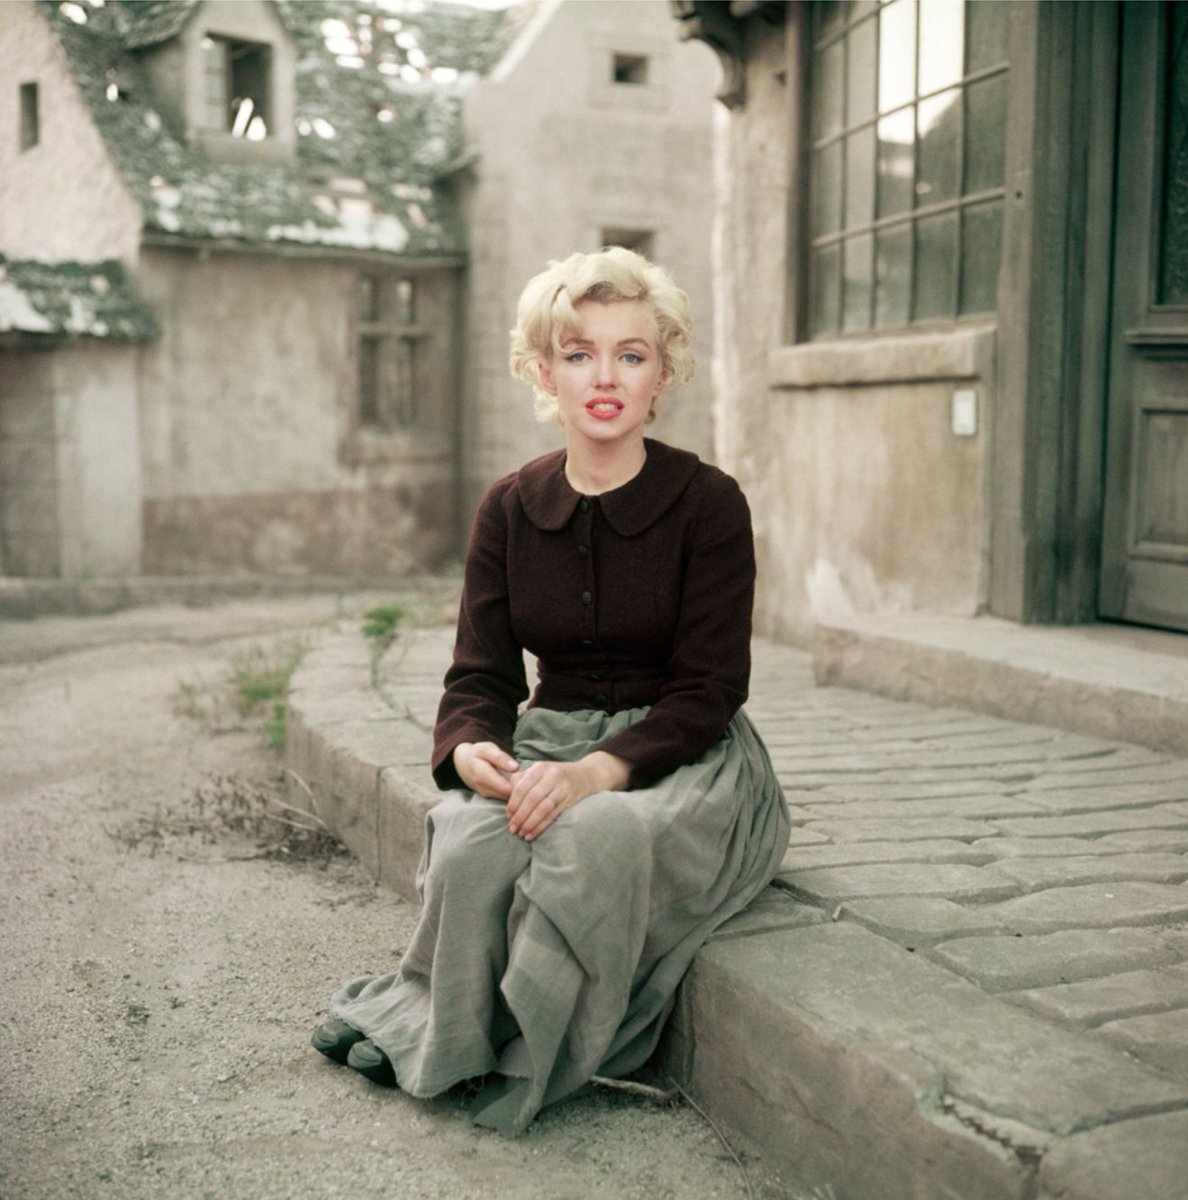 Marilyn Monroe | “Peasant Sitting” | Milton H. Greene | May 1954 “Rifling through the 20th Century Fox prop closet during one of those glorious Sunday afternoons on the studio backlots, Milton and Marilyn photographed the “Peasant Sitting”. Taken on May 24, 1954, this series was